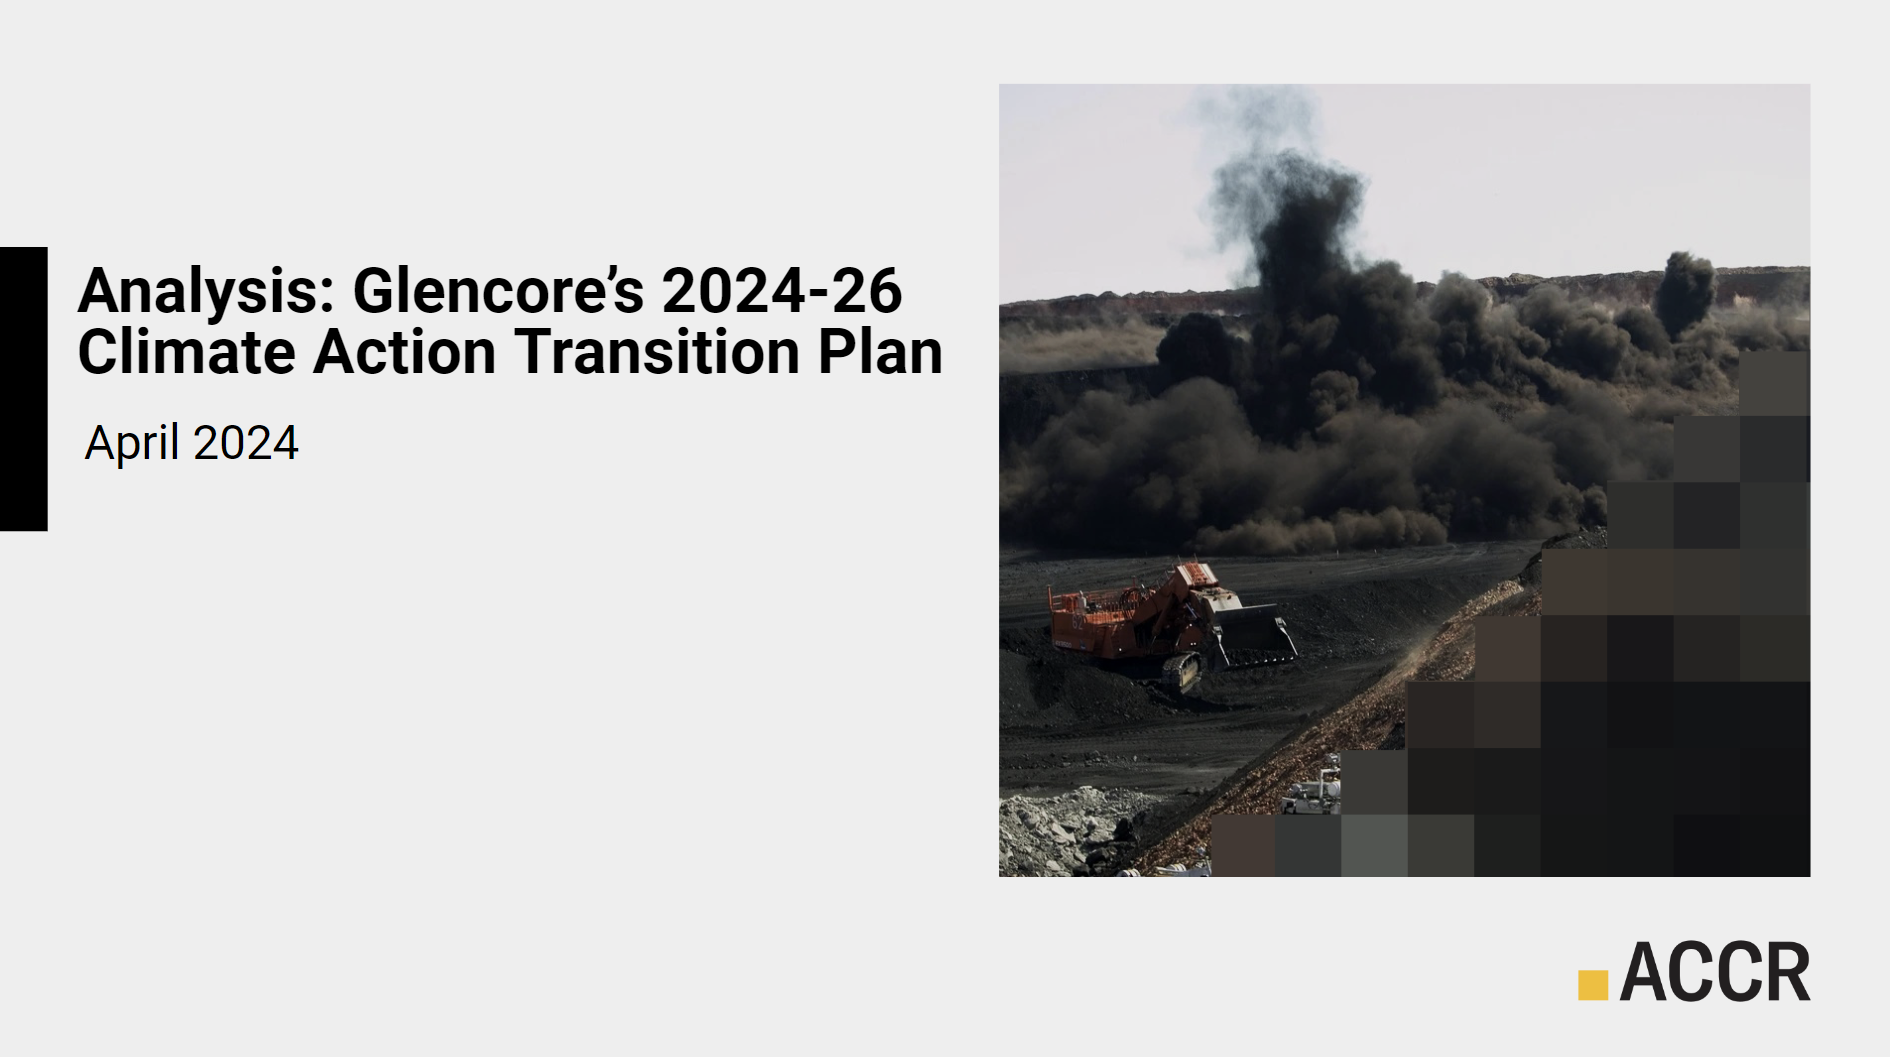 Cover page of the ACCR Presentation on Glencore’s 2024 AGM publication.